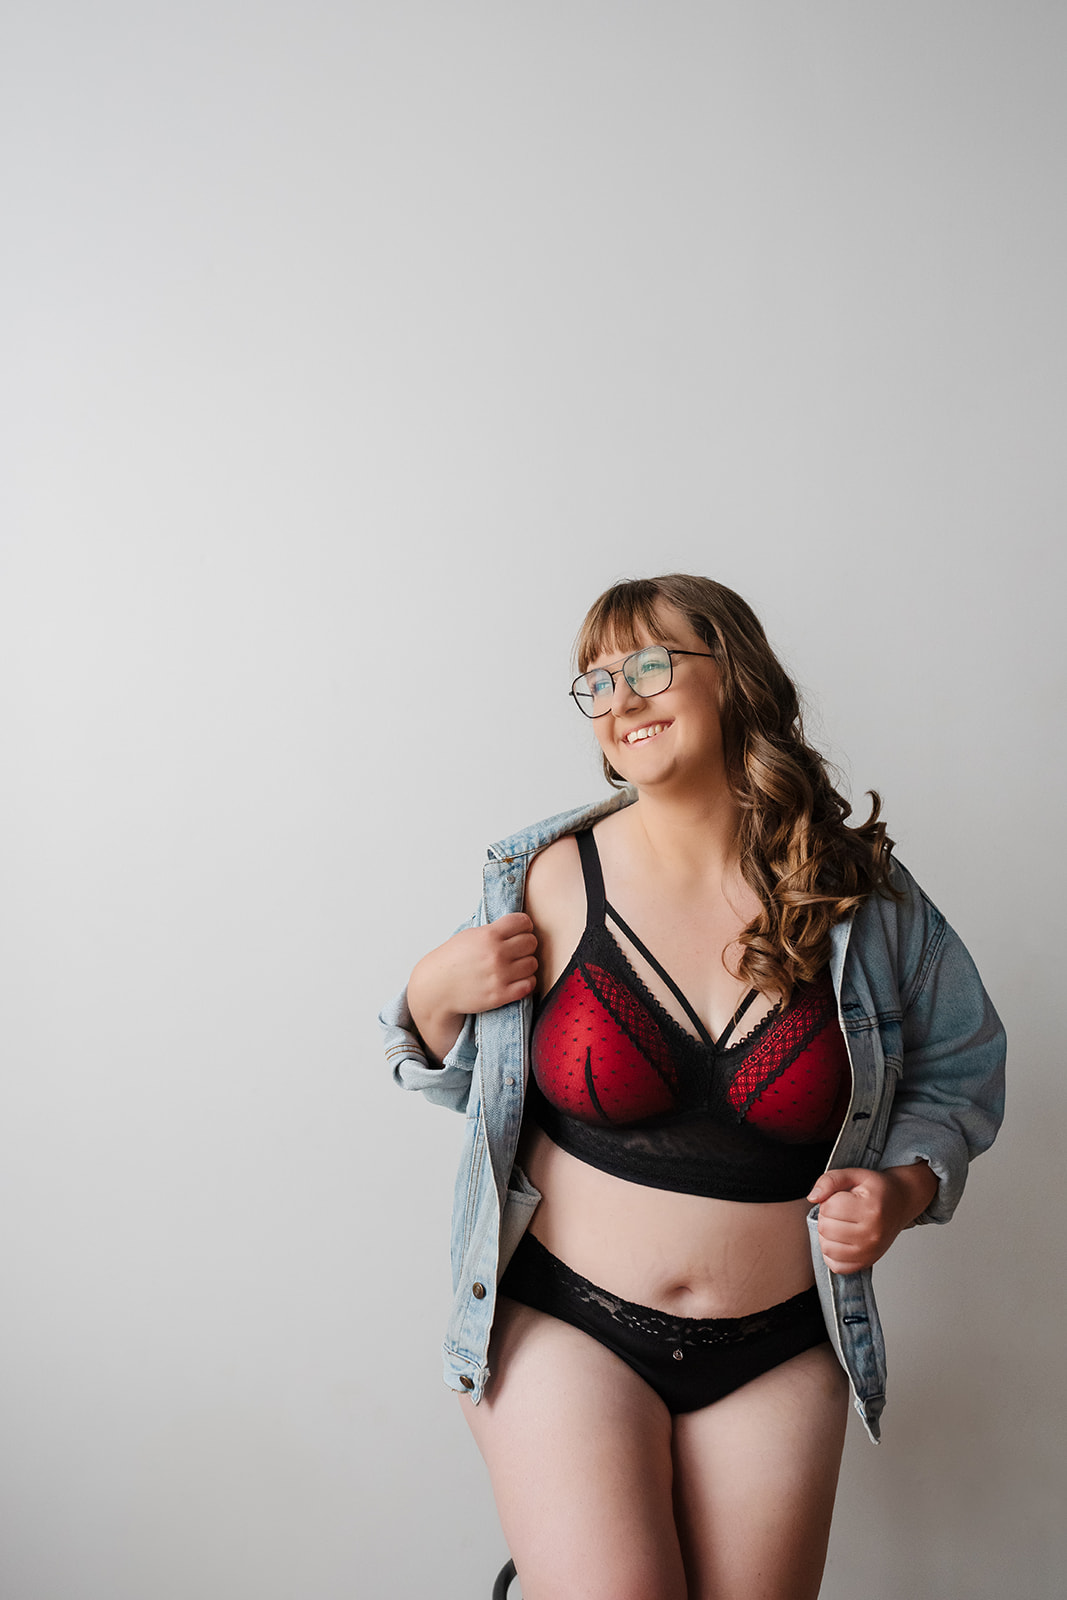 A woman wearing black and red bra and panty set with denim jacket during her boudoir photo session